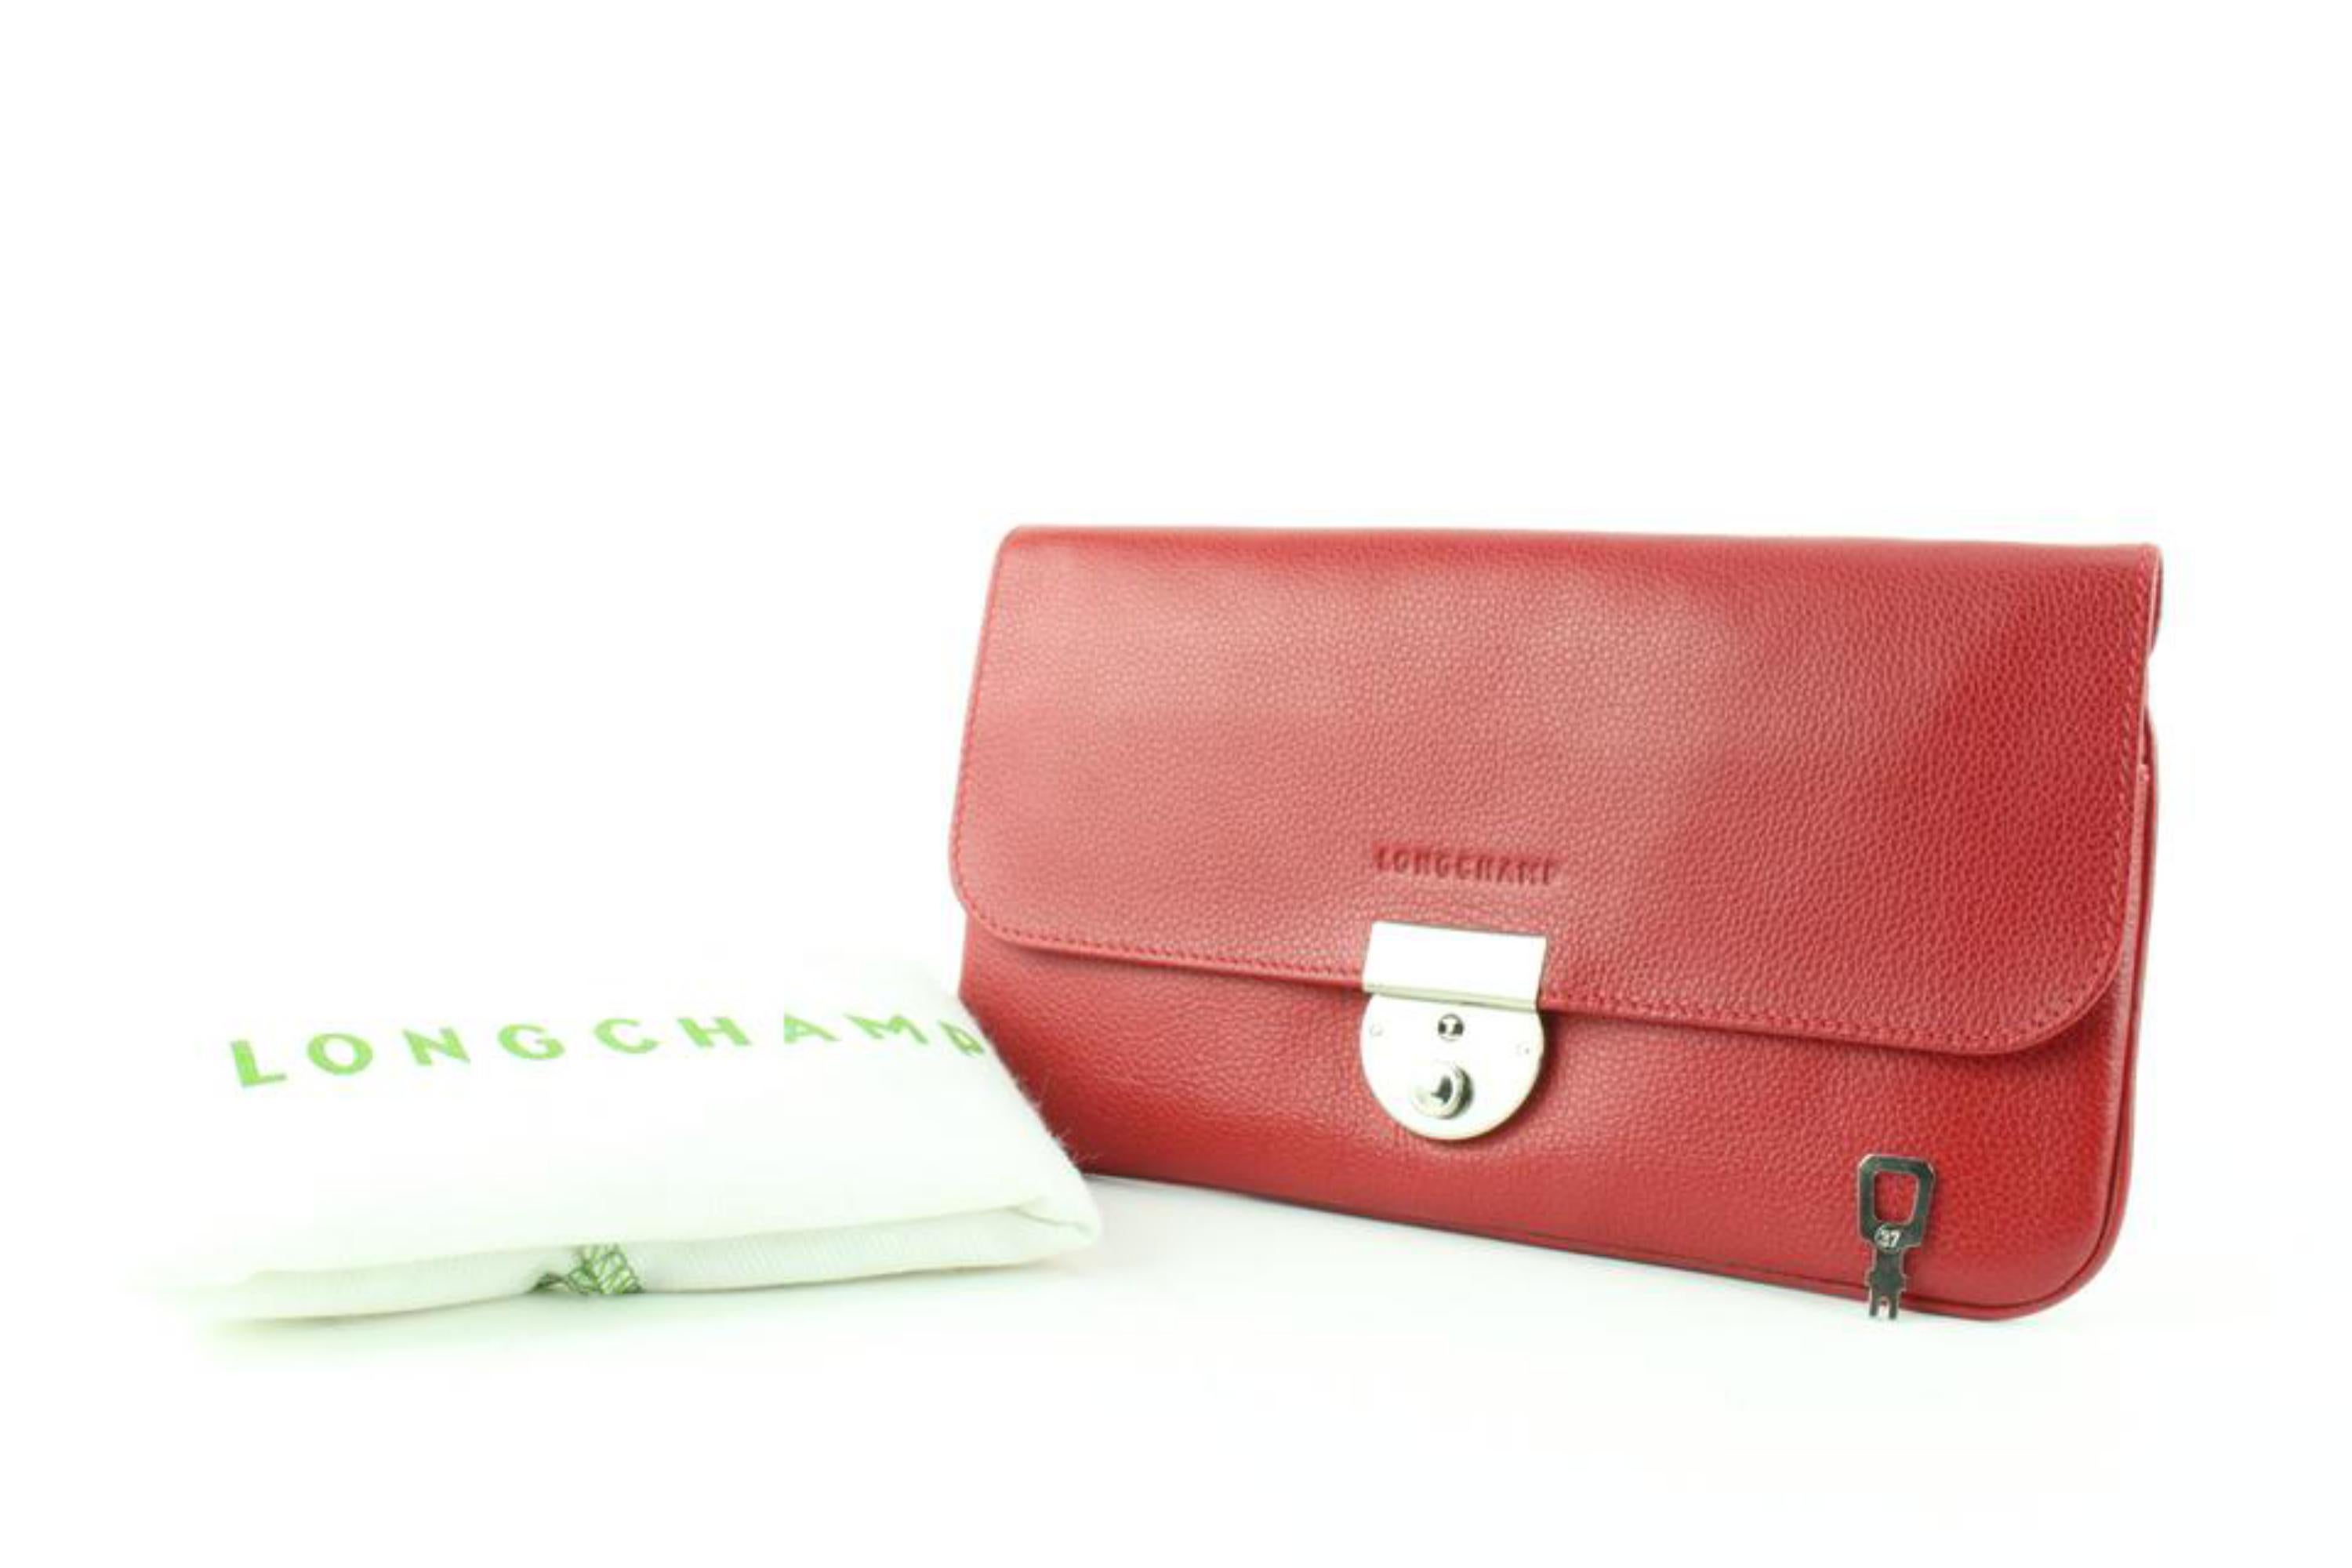 Longchamp Red Leather Lock Flap Clutch 9LC113
Date Code/Serial Number: 0954875 3419021608
Made In: China
Measurements: Length: 10 